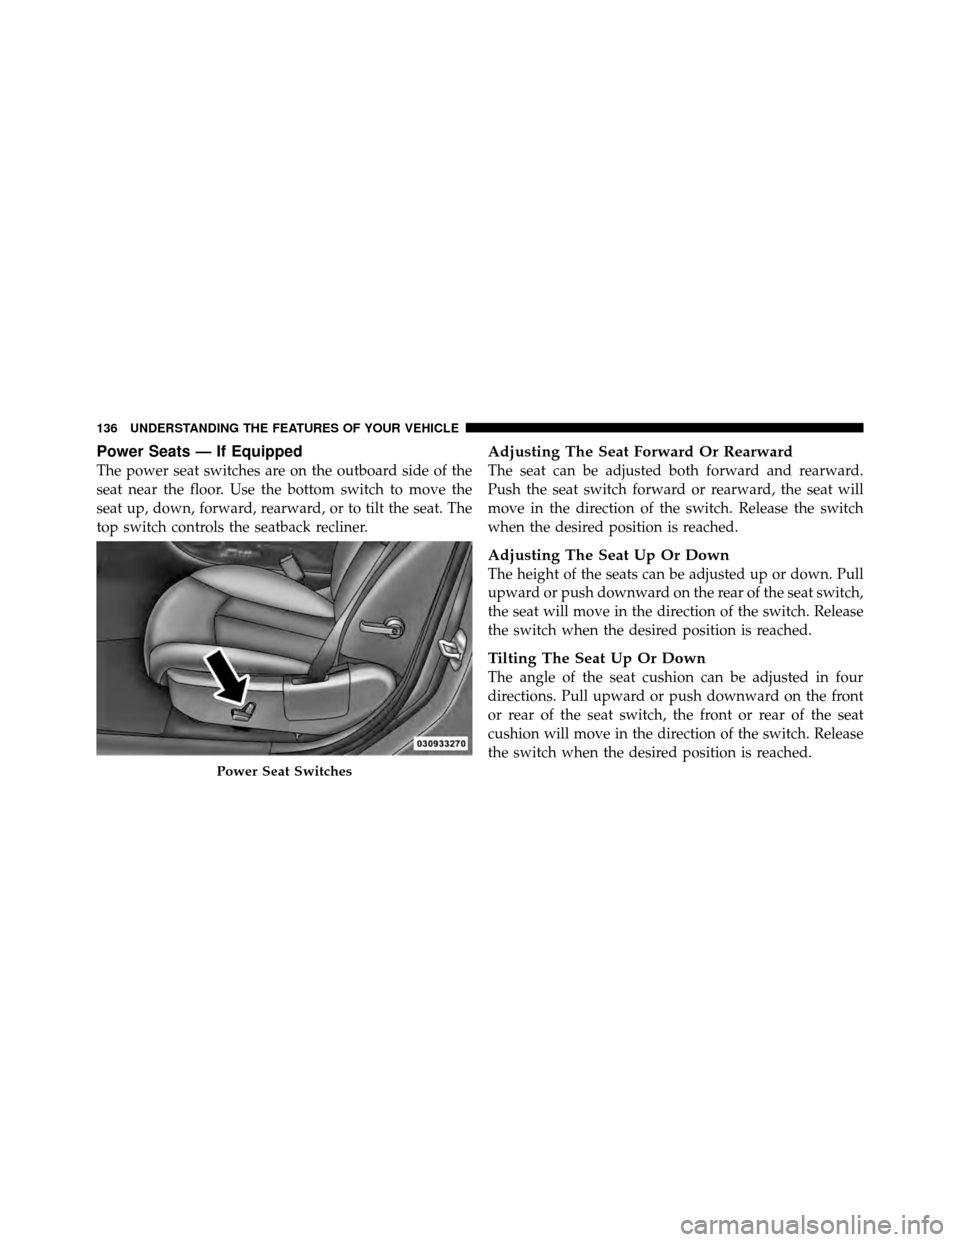 CHRYSLER 200 2012 1.G Owners Manual Power Seats — If Equipped
The power seat switches are on the outboard side of the
seat near the floor. Use the bottom switch to move the
seat up, down, forward, rearward, or to tilt the seat. The
to